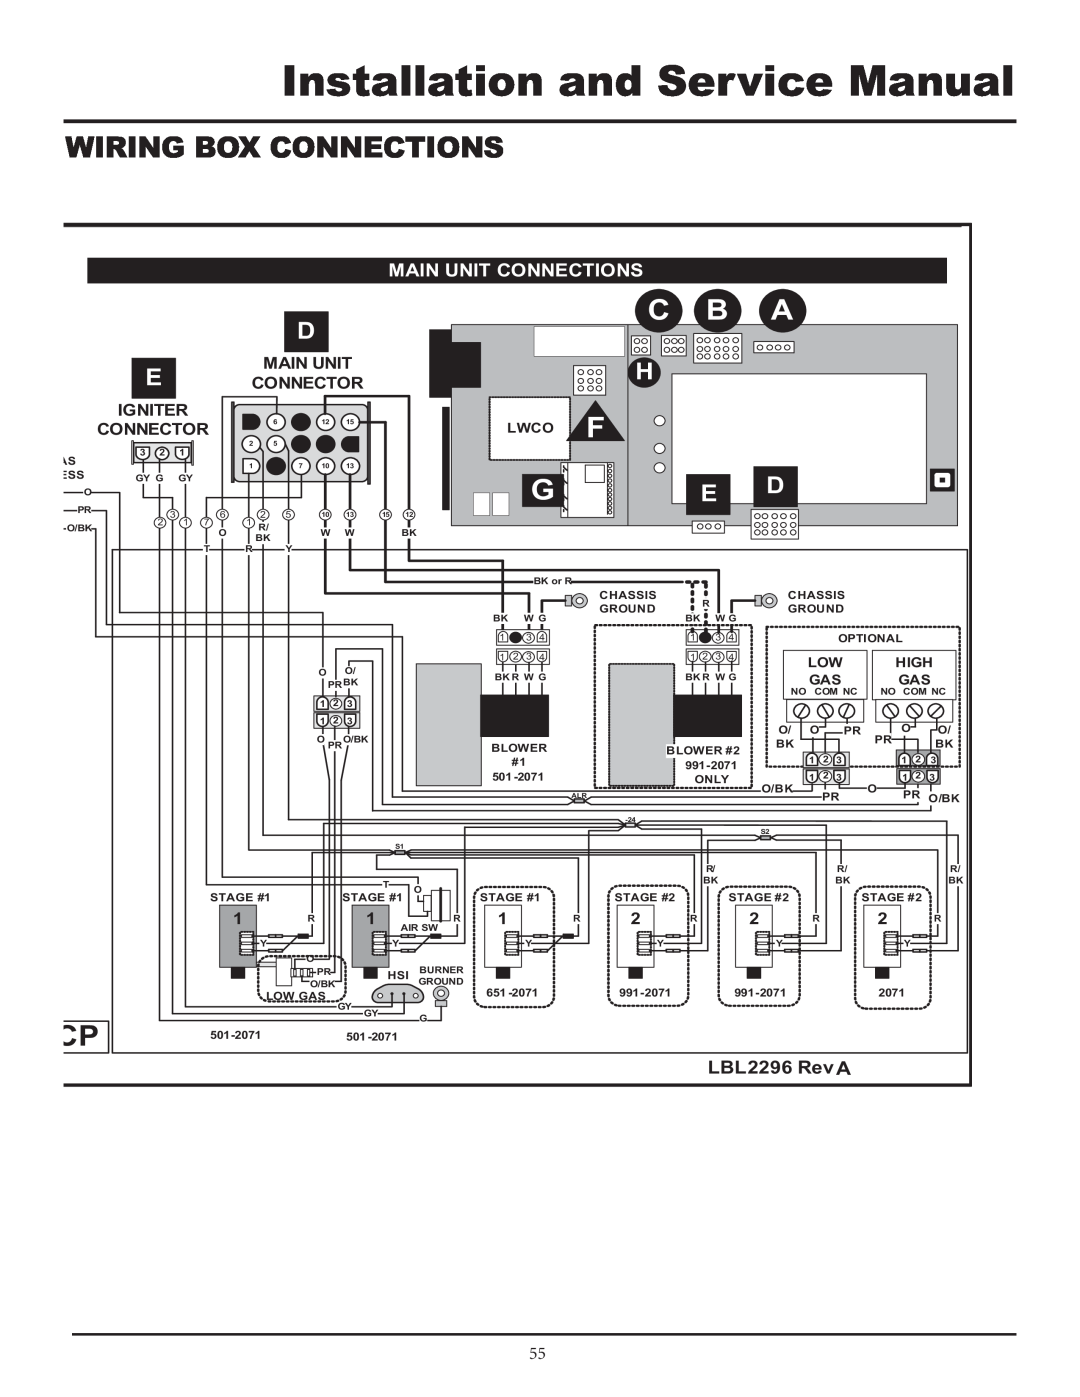 Lochinvar F0600187510 service manual Main Unit Connections, LBL2296 Rev A, Wiring Box Connections, Connector, Igniter 